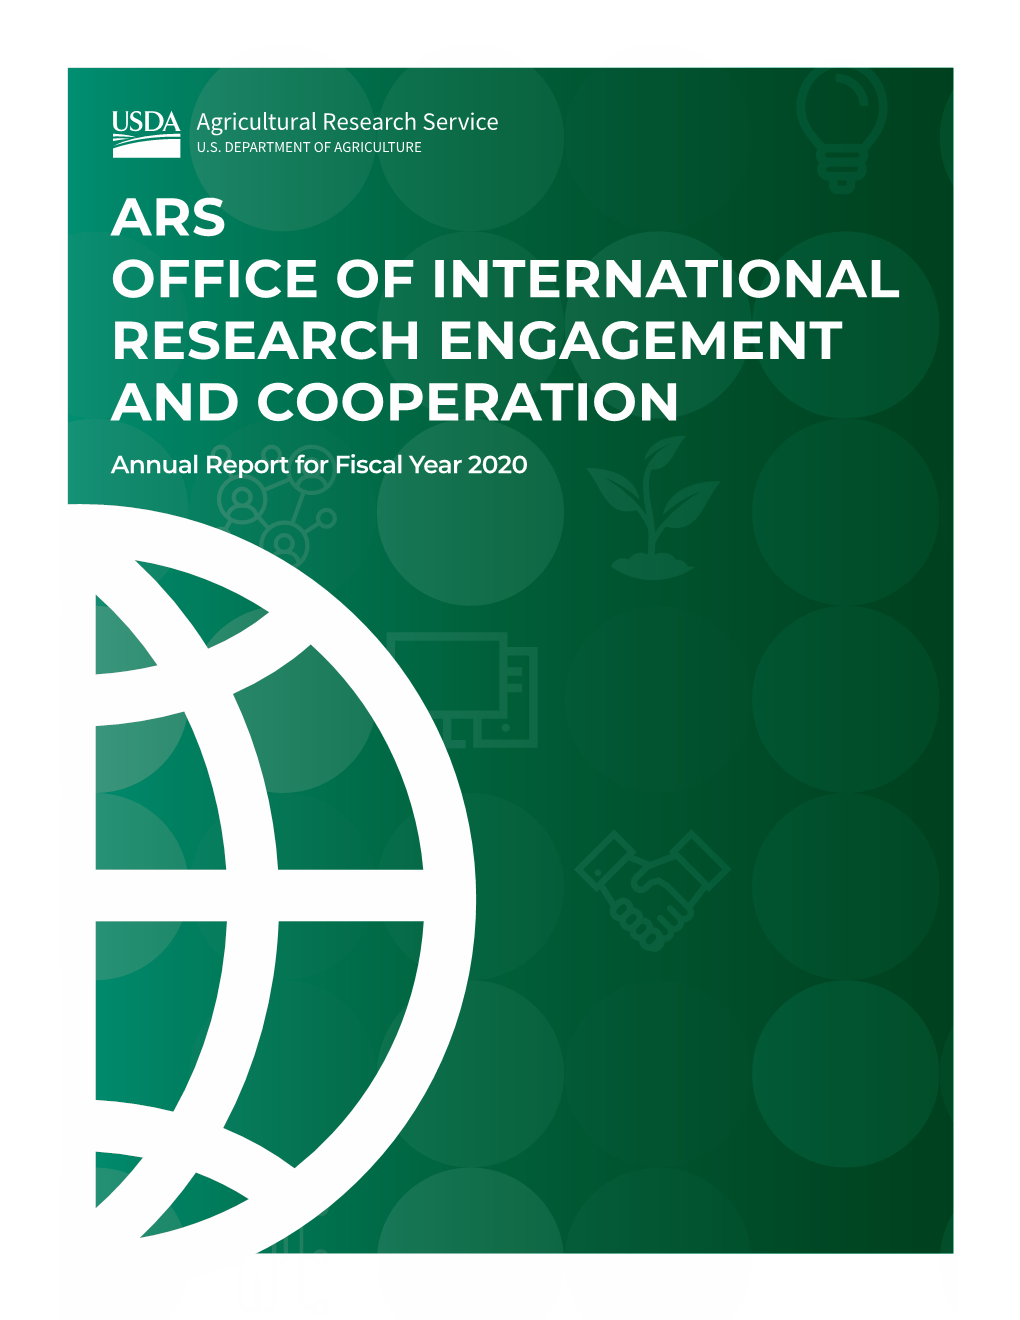 ARS OFFICE of INTERNATIONAL RESEARCH ENGAGEMENT and COOPERATION Annual Report for Fiscal Year 2020 ARS Office of International Research Engagement and Cooperation